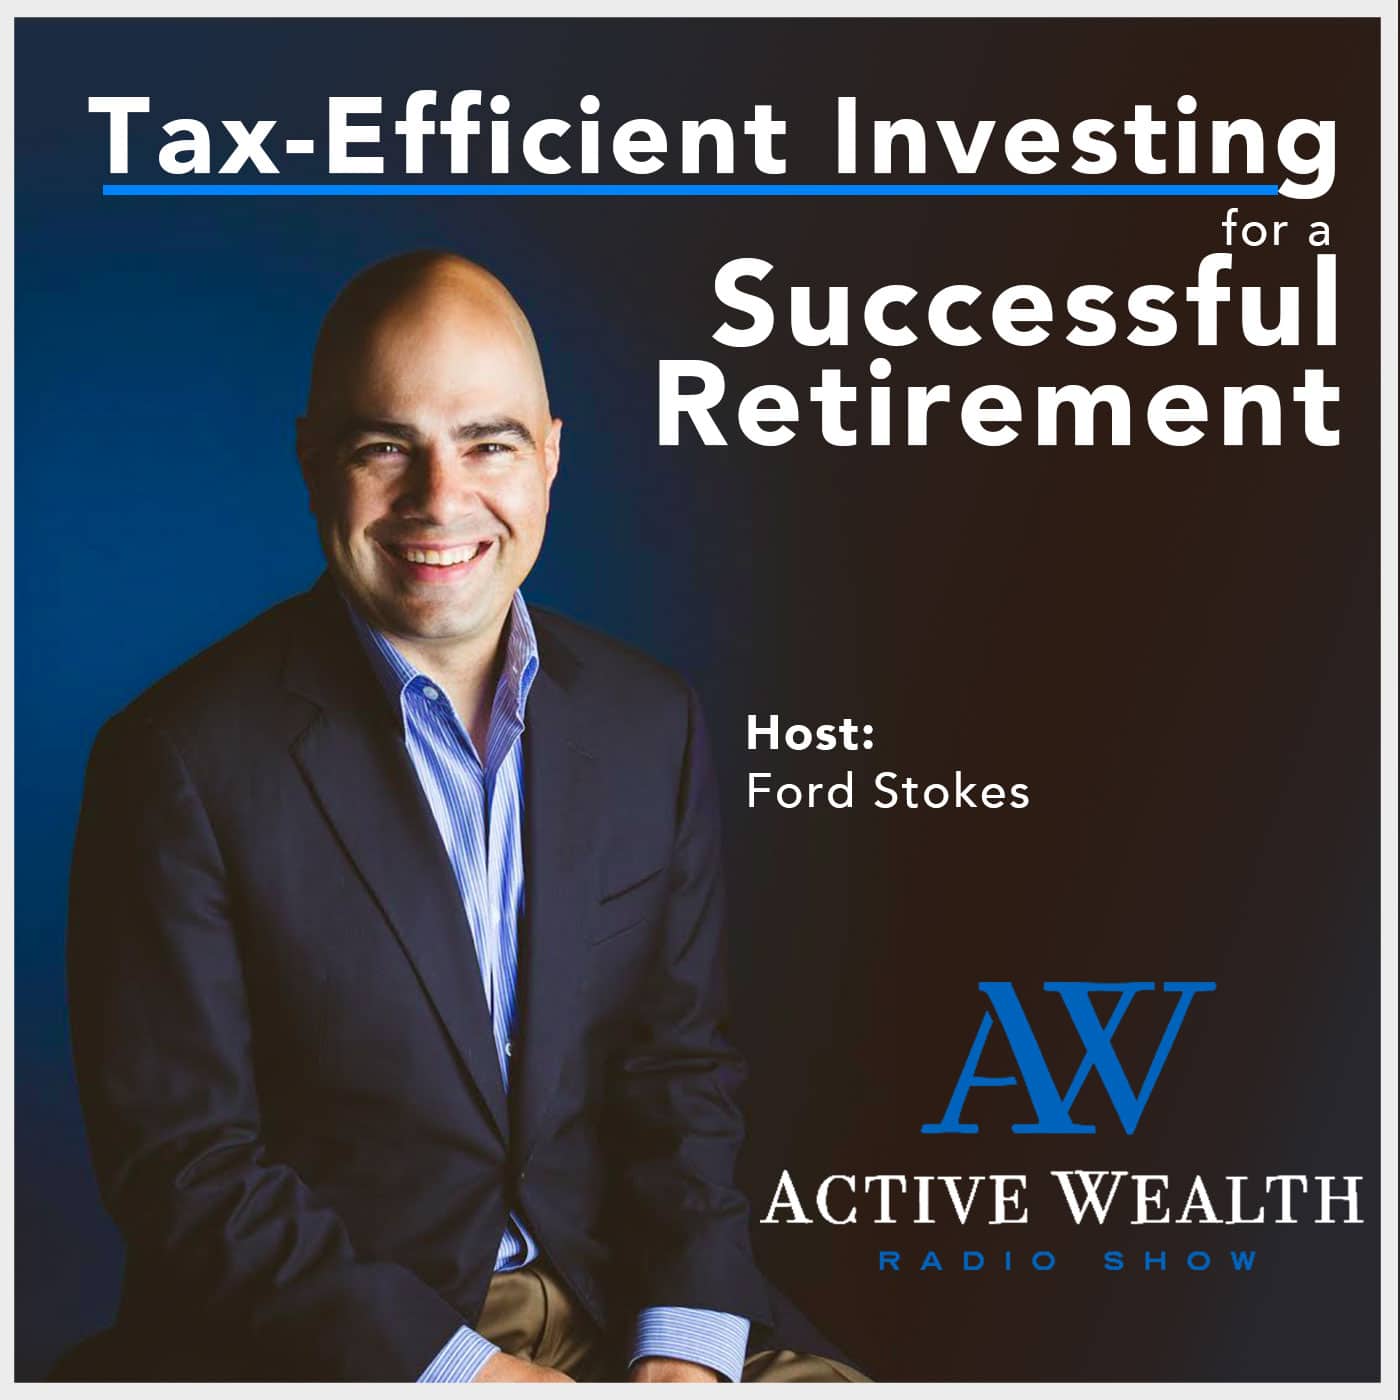 The Smart Retirement Plan: Smart Review and Smart Income Streams